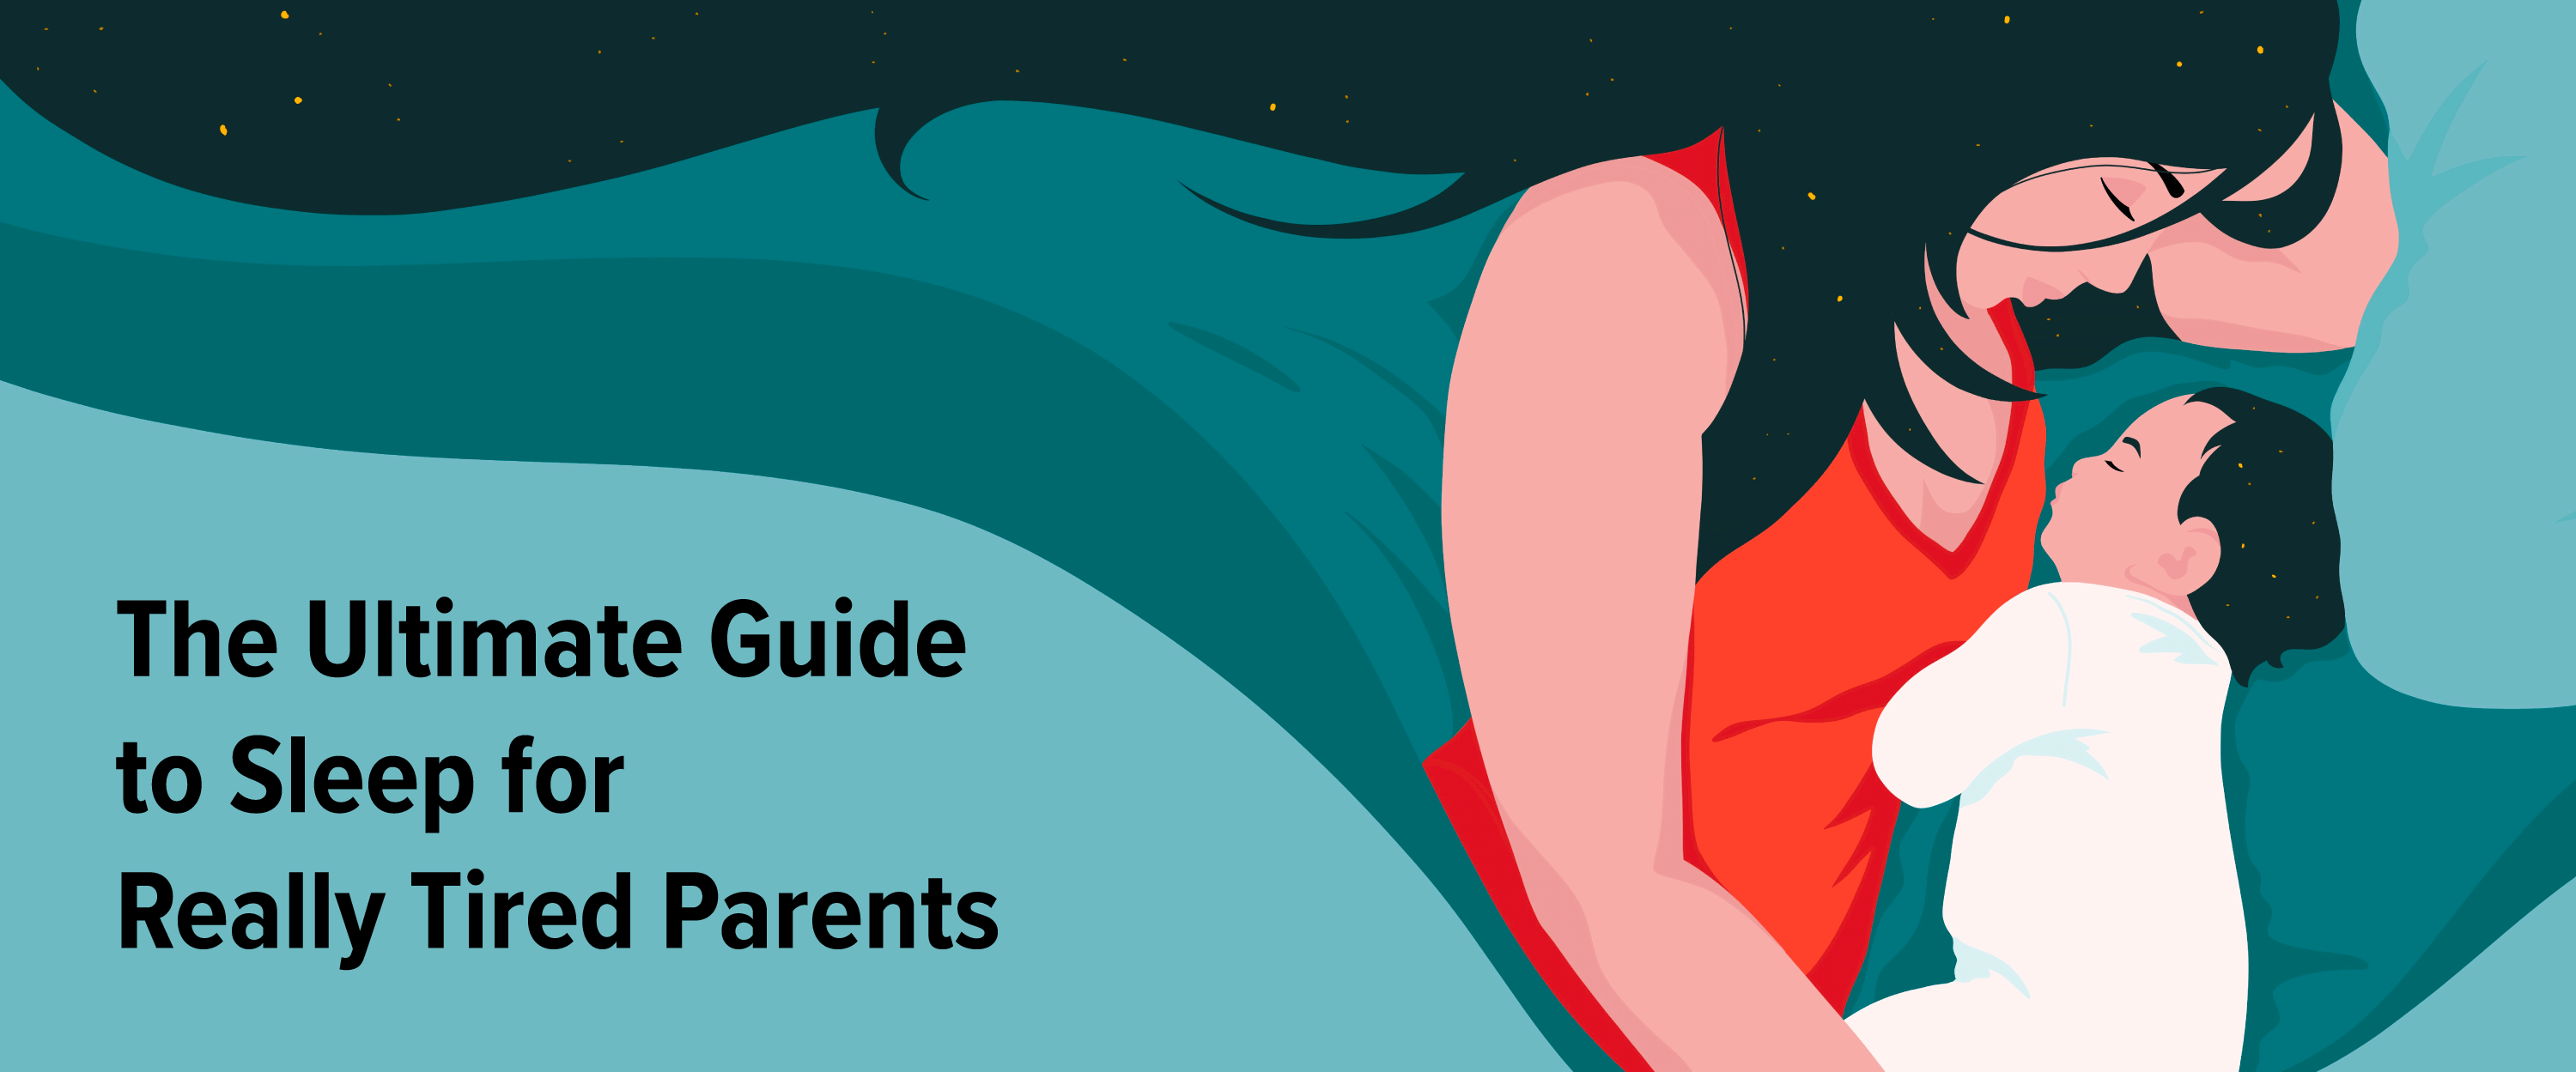 The Ultimate Guide to Sleep for Really Tired Parents